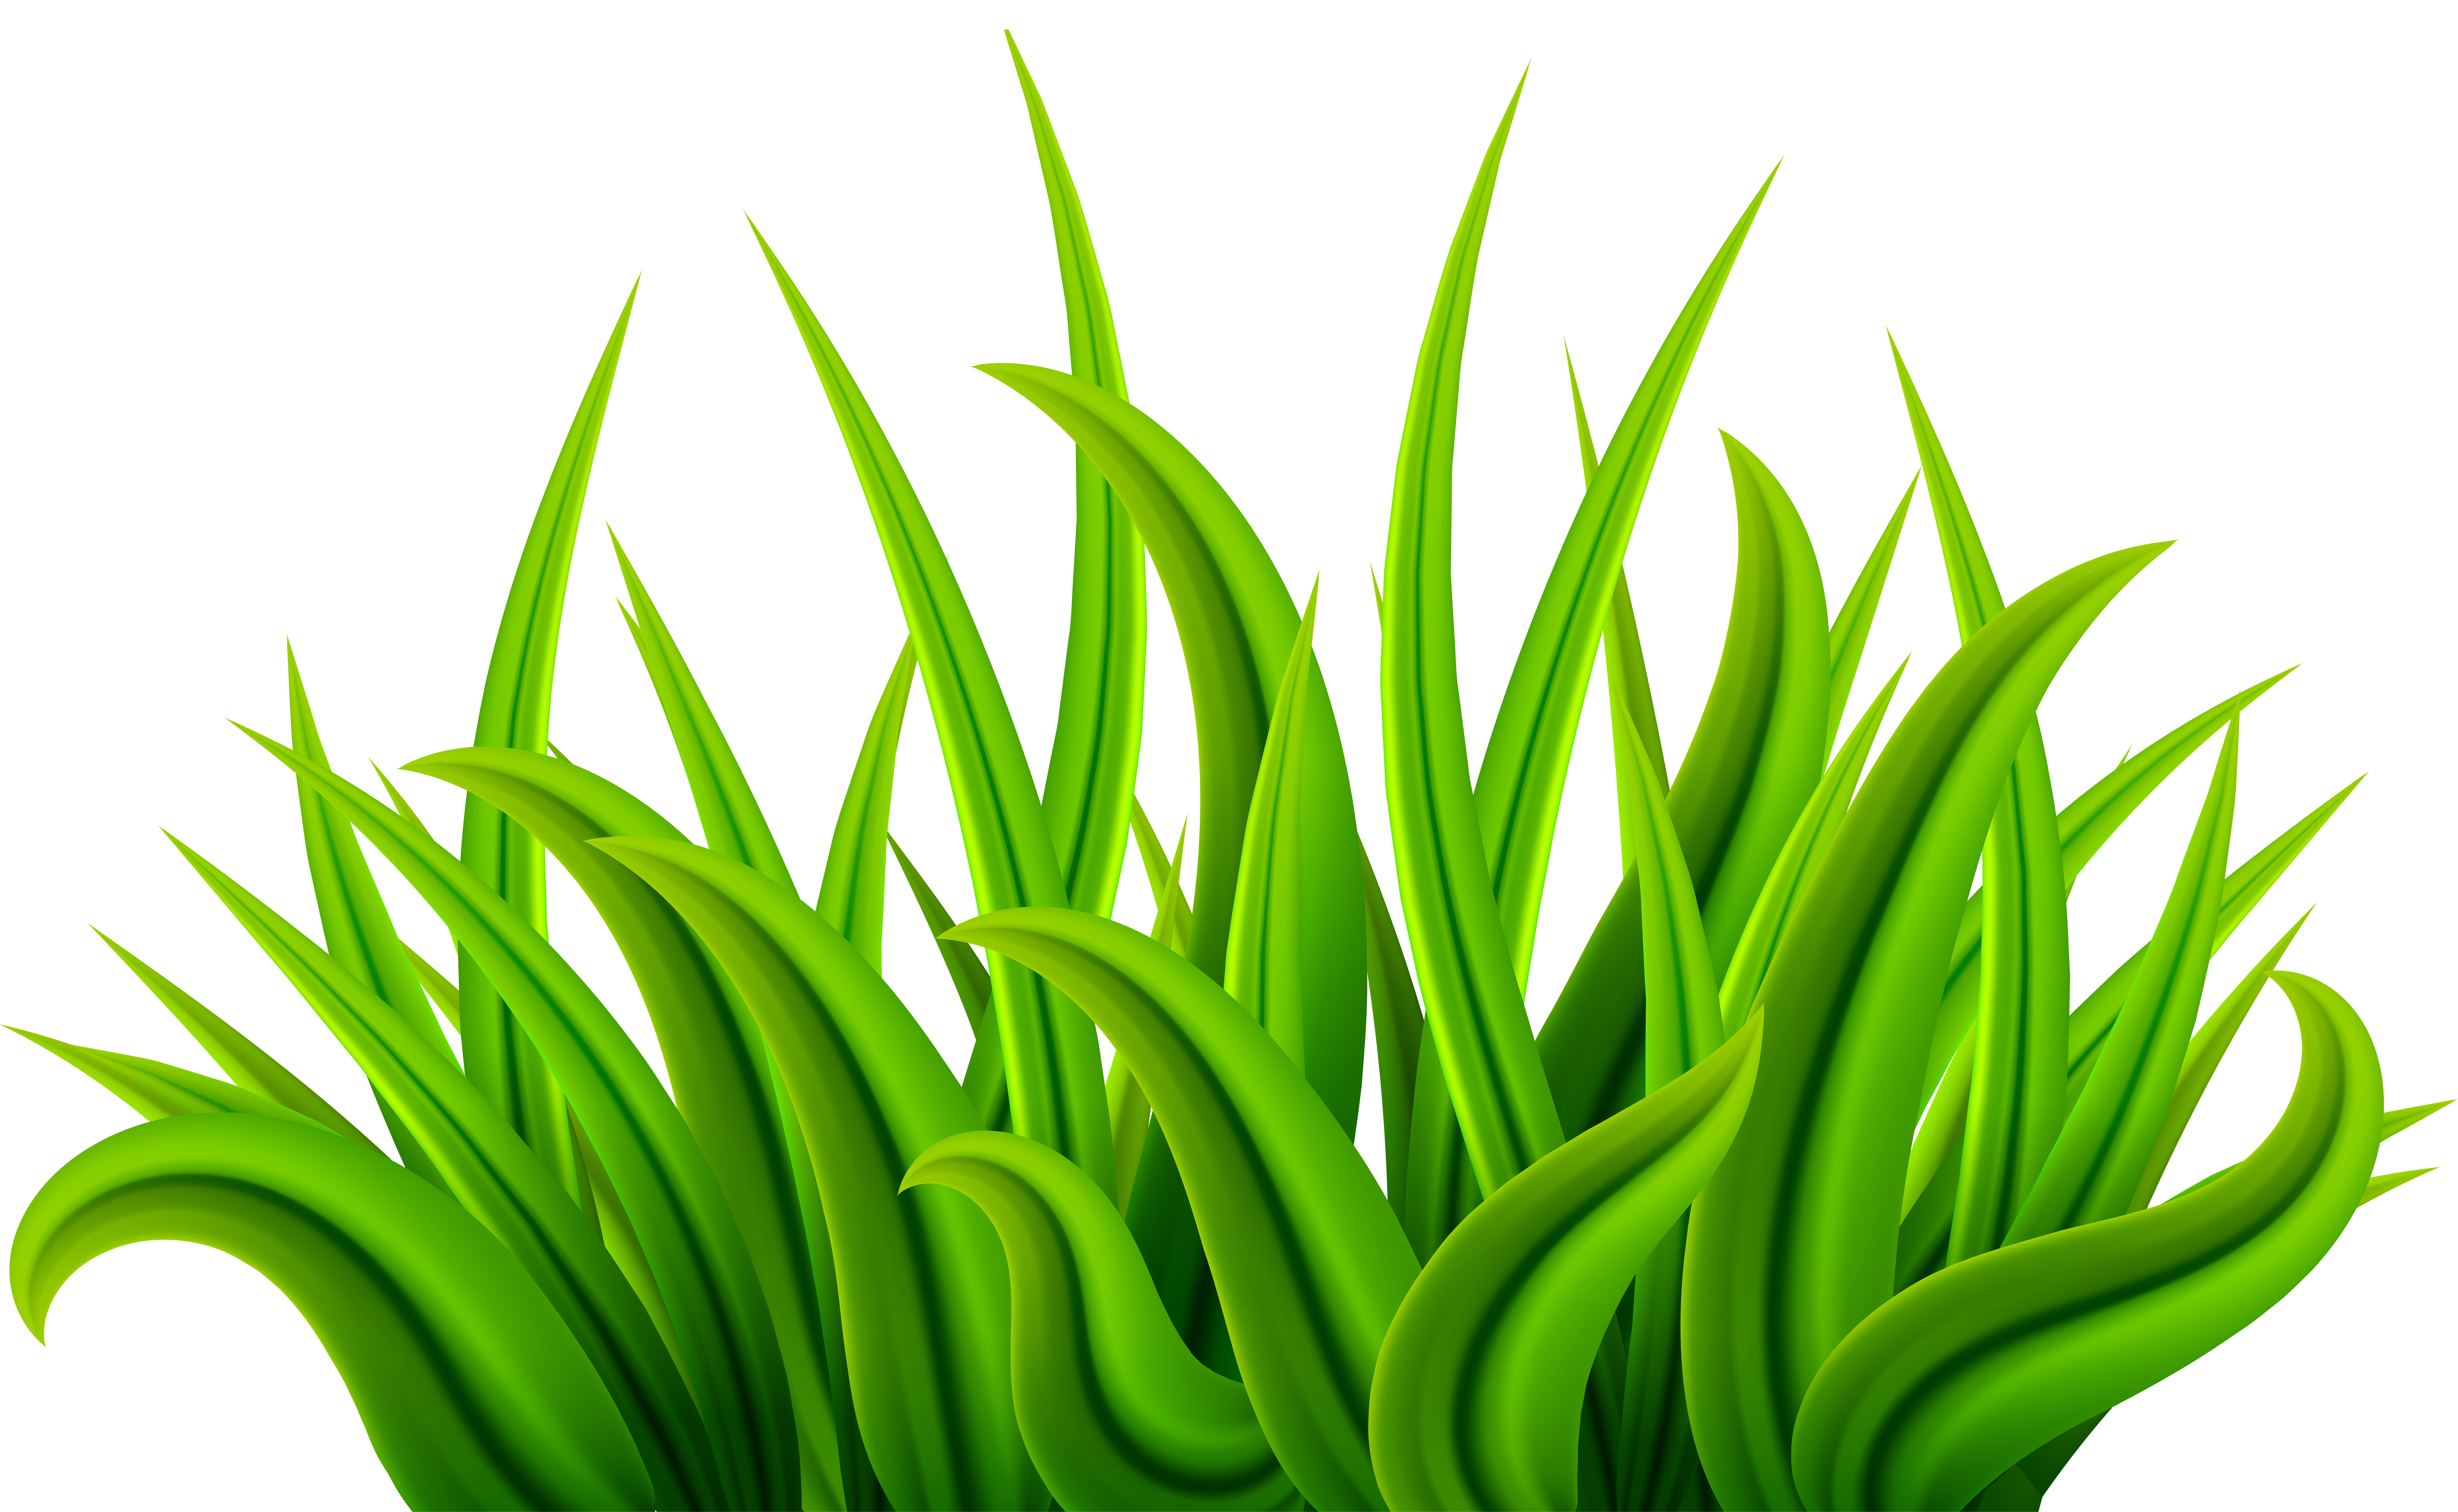 Grass clipart herbs Grass herbs Transparent FREE for download on WebStockReview 2021